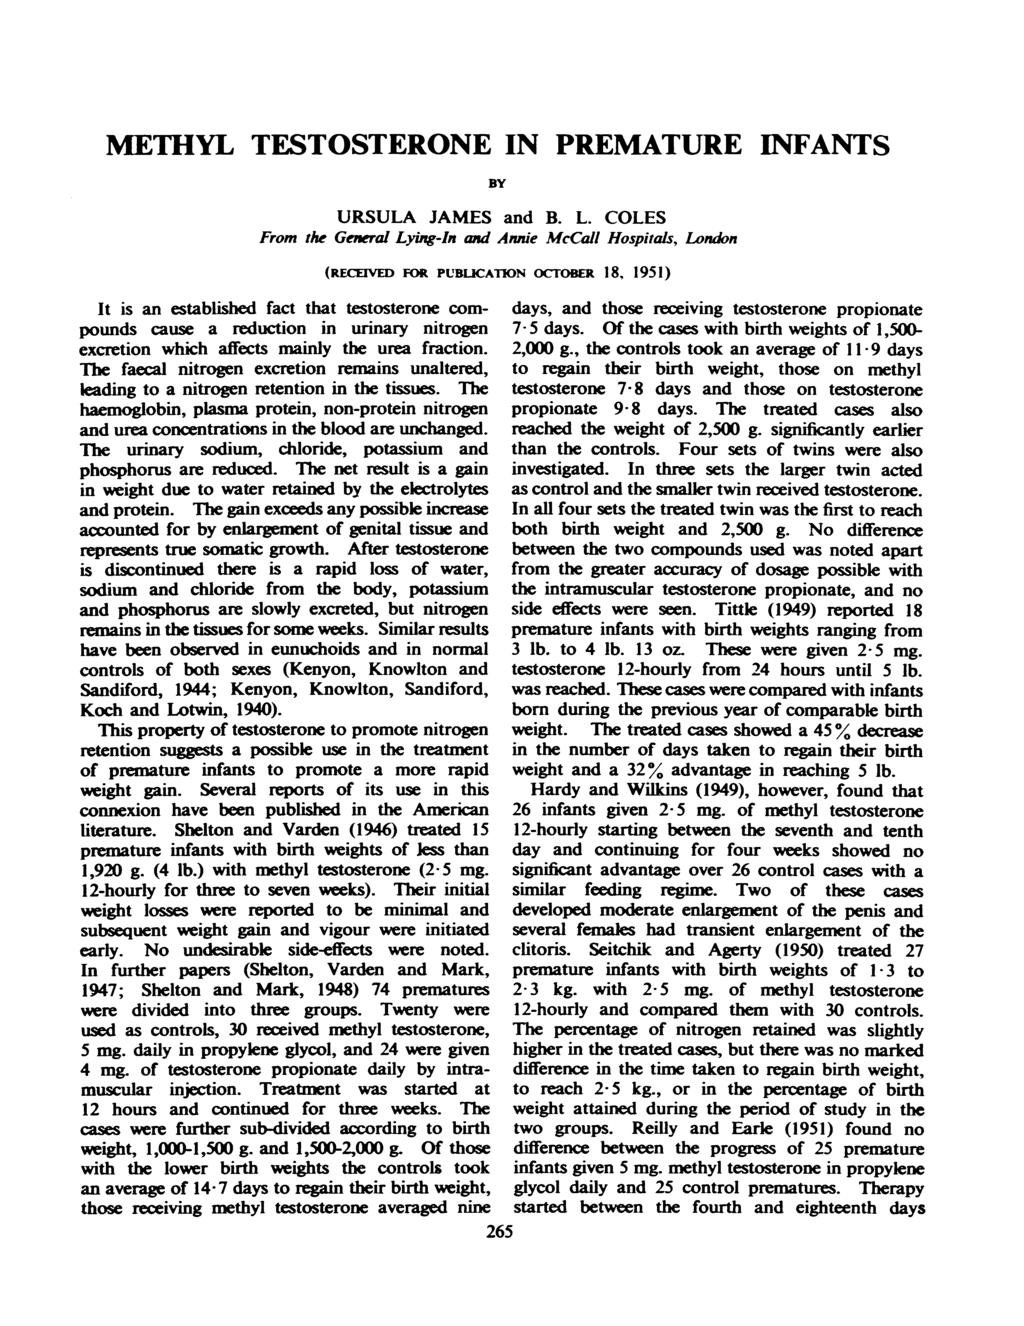 METHYL TESTOSTERONE IN PREMATURE INFANTS BY URSULA JAMES and B. L. COLES Frm the General Lying-In and Annie McCall Hspitals, Lndn (RECE:IVED FOR PUBLICATiN crber 18.